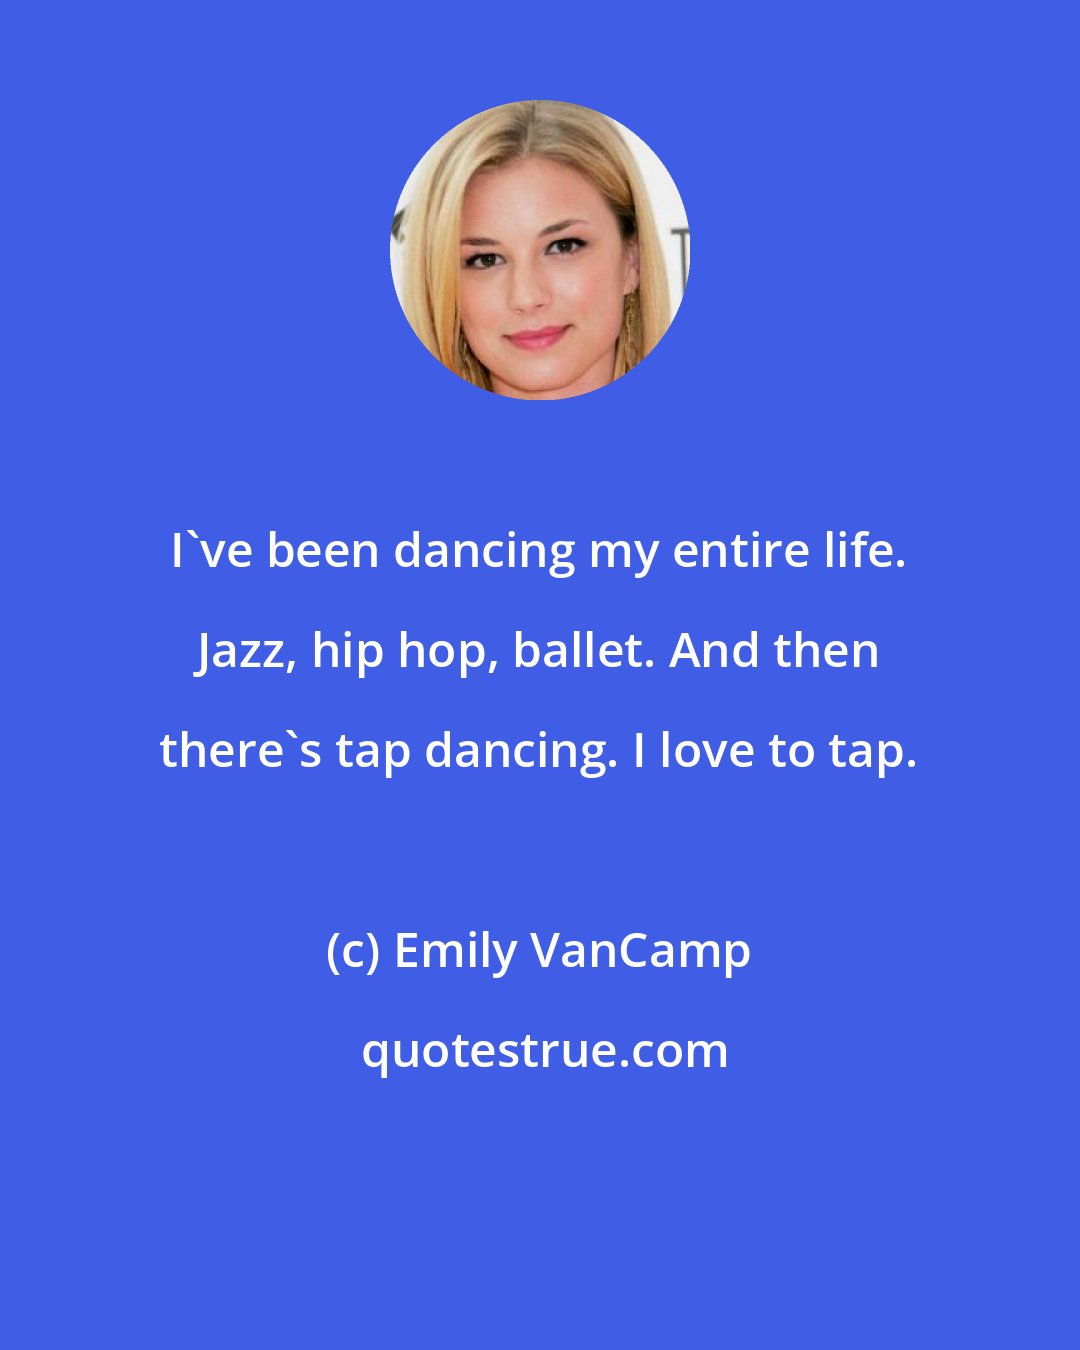 Emily VanCamp: I've been dancing my entire life. Jazz, hip hop, ballet. And then there's tap dancing. I love to tap.